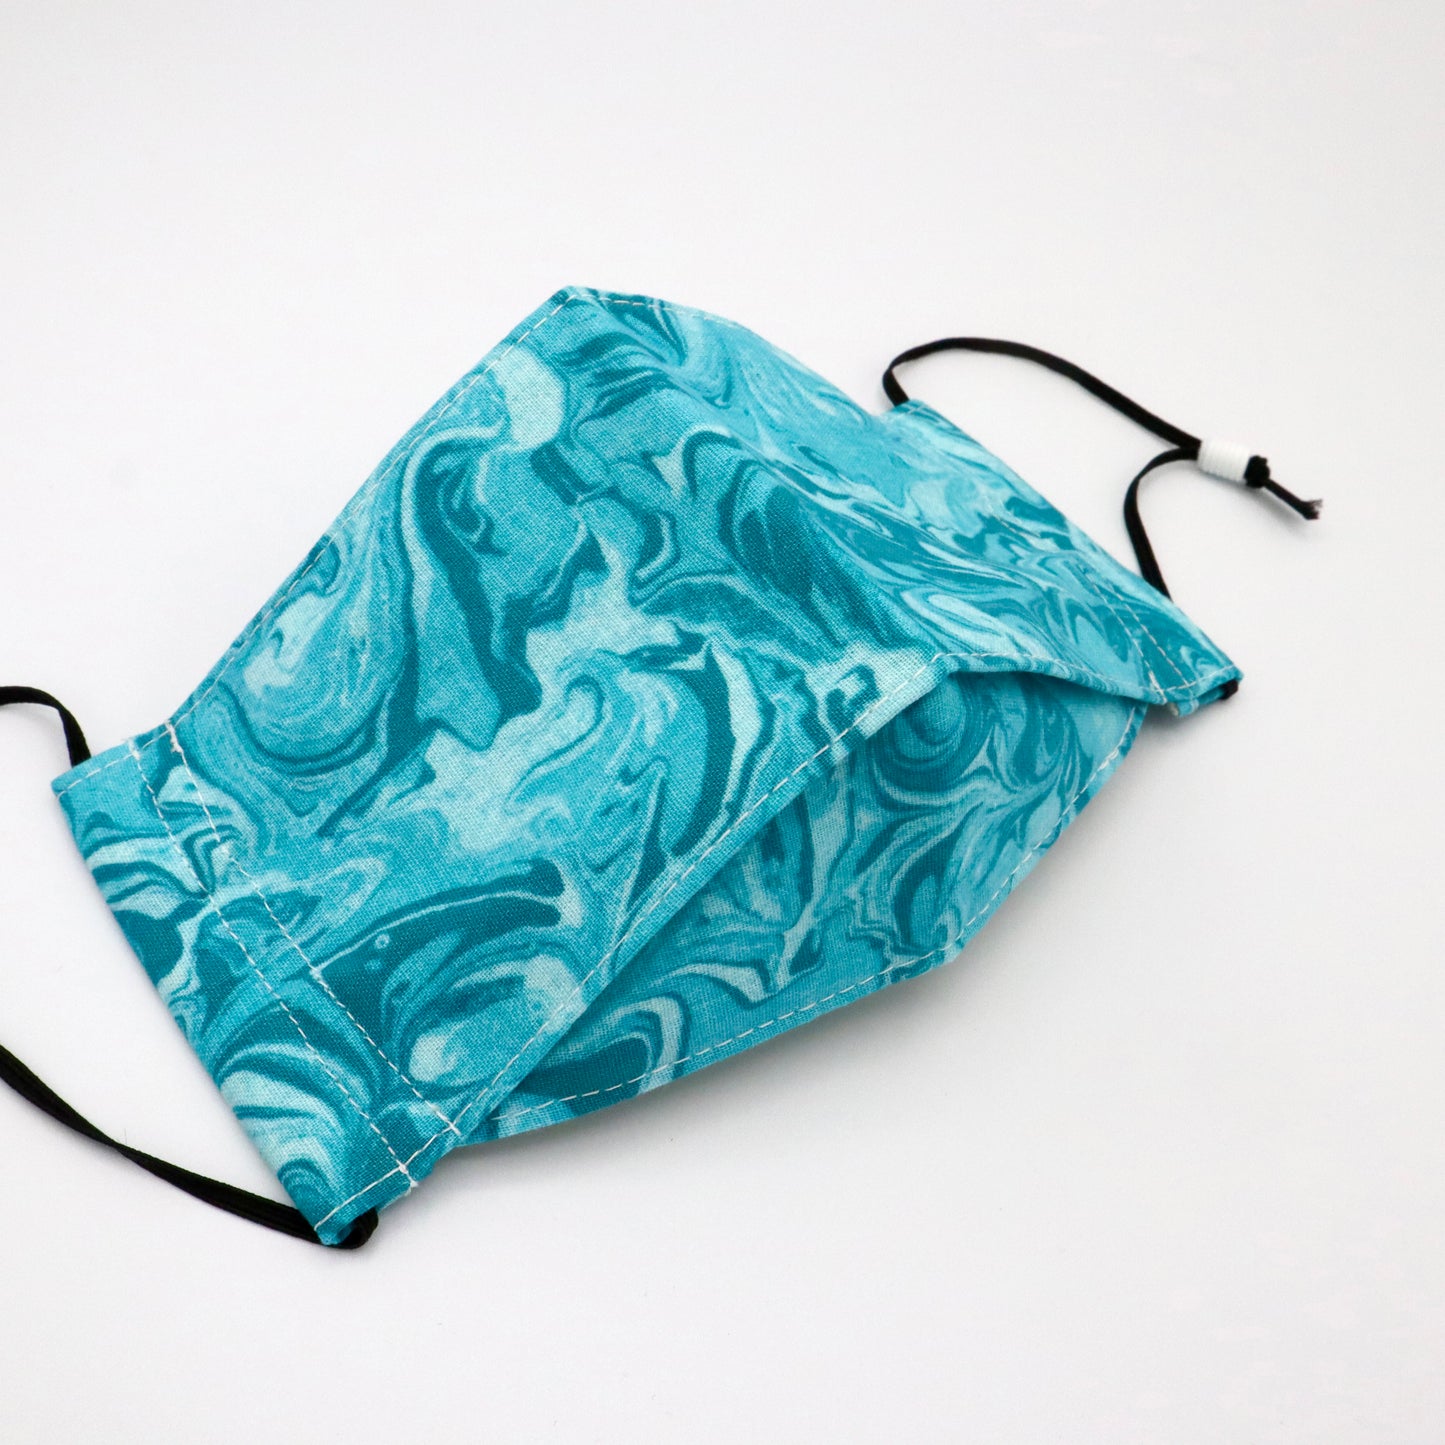 Ocean Teal | 3D Face Mask with Nose Wire, Adjustable Ear Loops, and Optional Filter Pocket